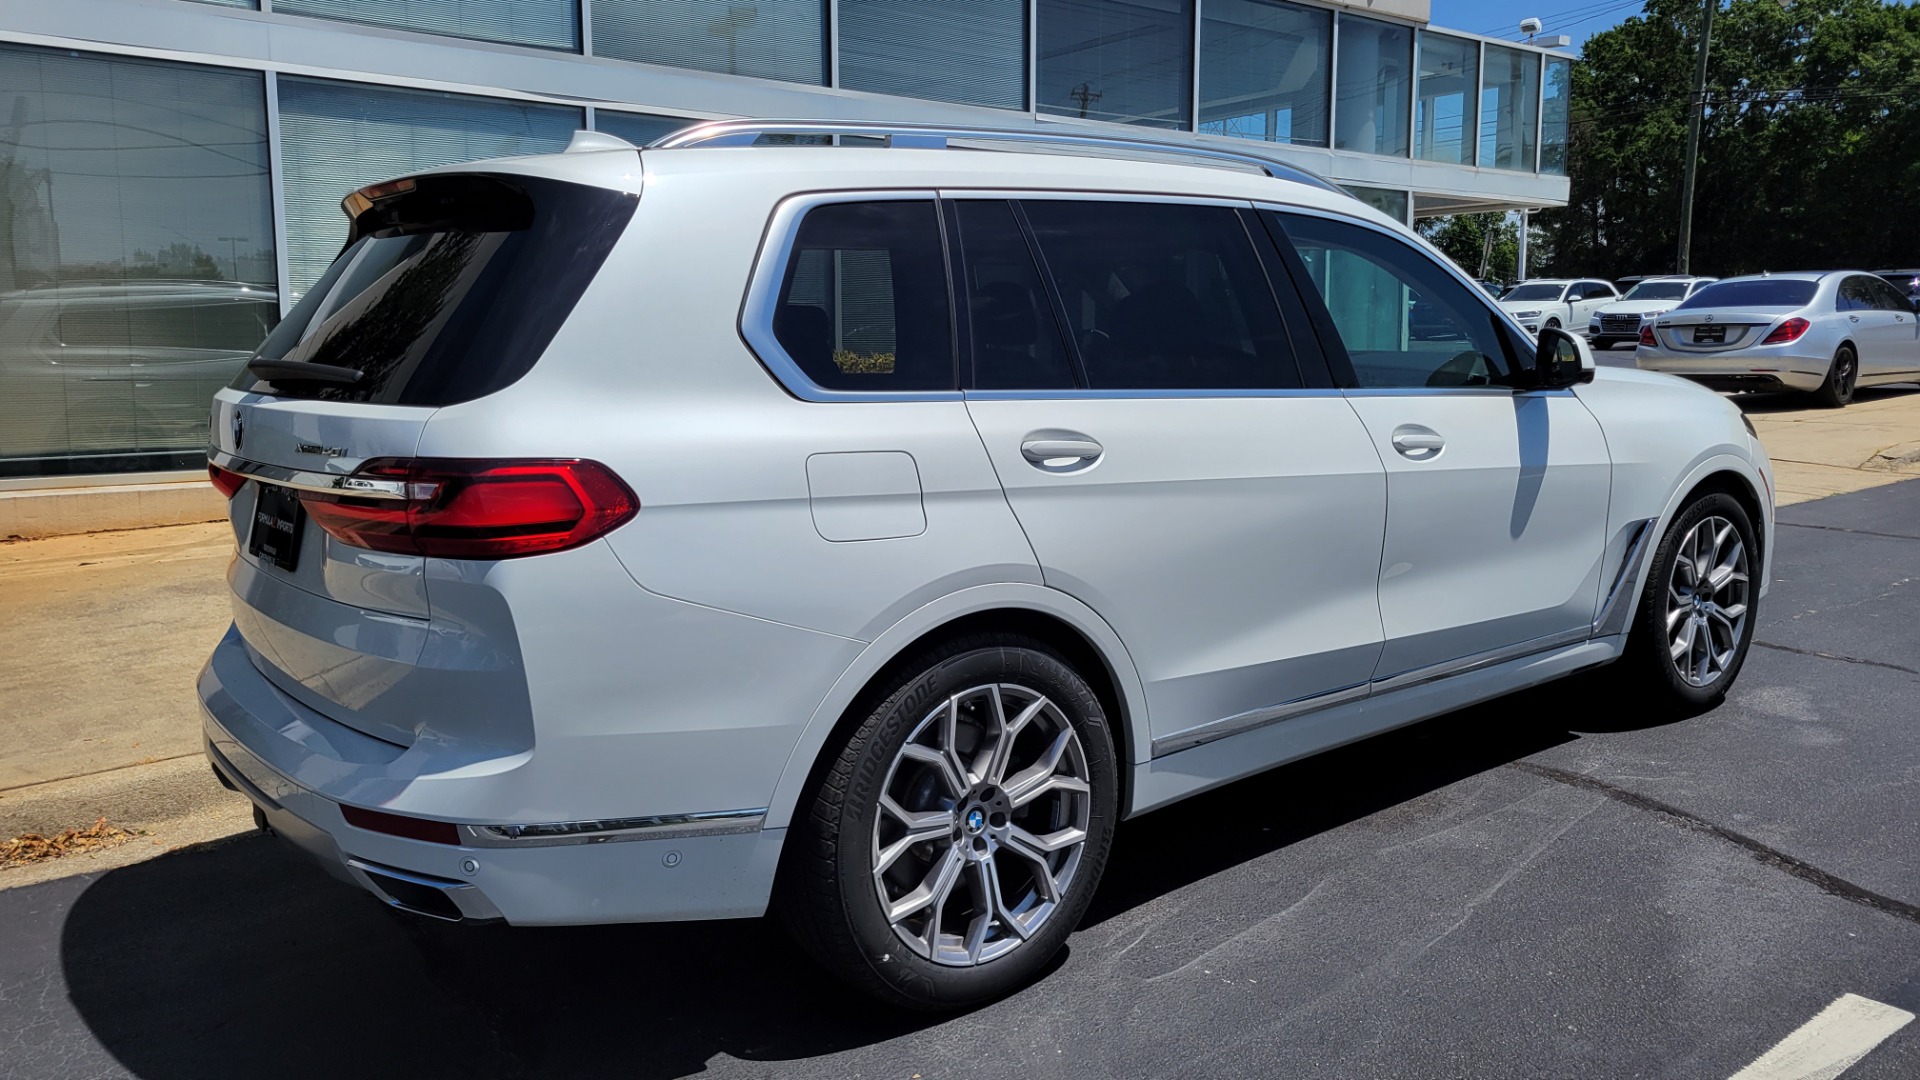 Used 2019 BMW X7 XDRIVE40I PREMIUM / NAV / HUD / PARK ASST PLUS / REMOTE START / 3D VIEW for sale $68,995 at Formula Imports in Charlotte NC 28227 7